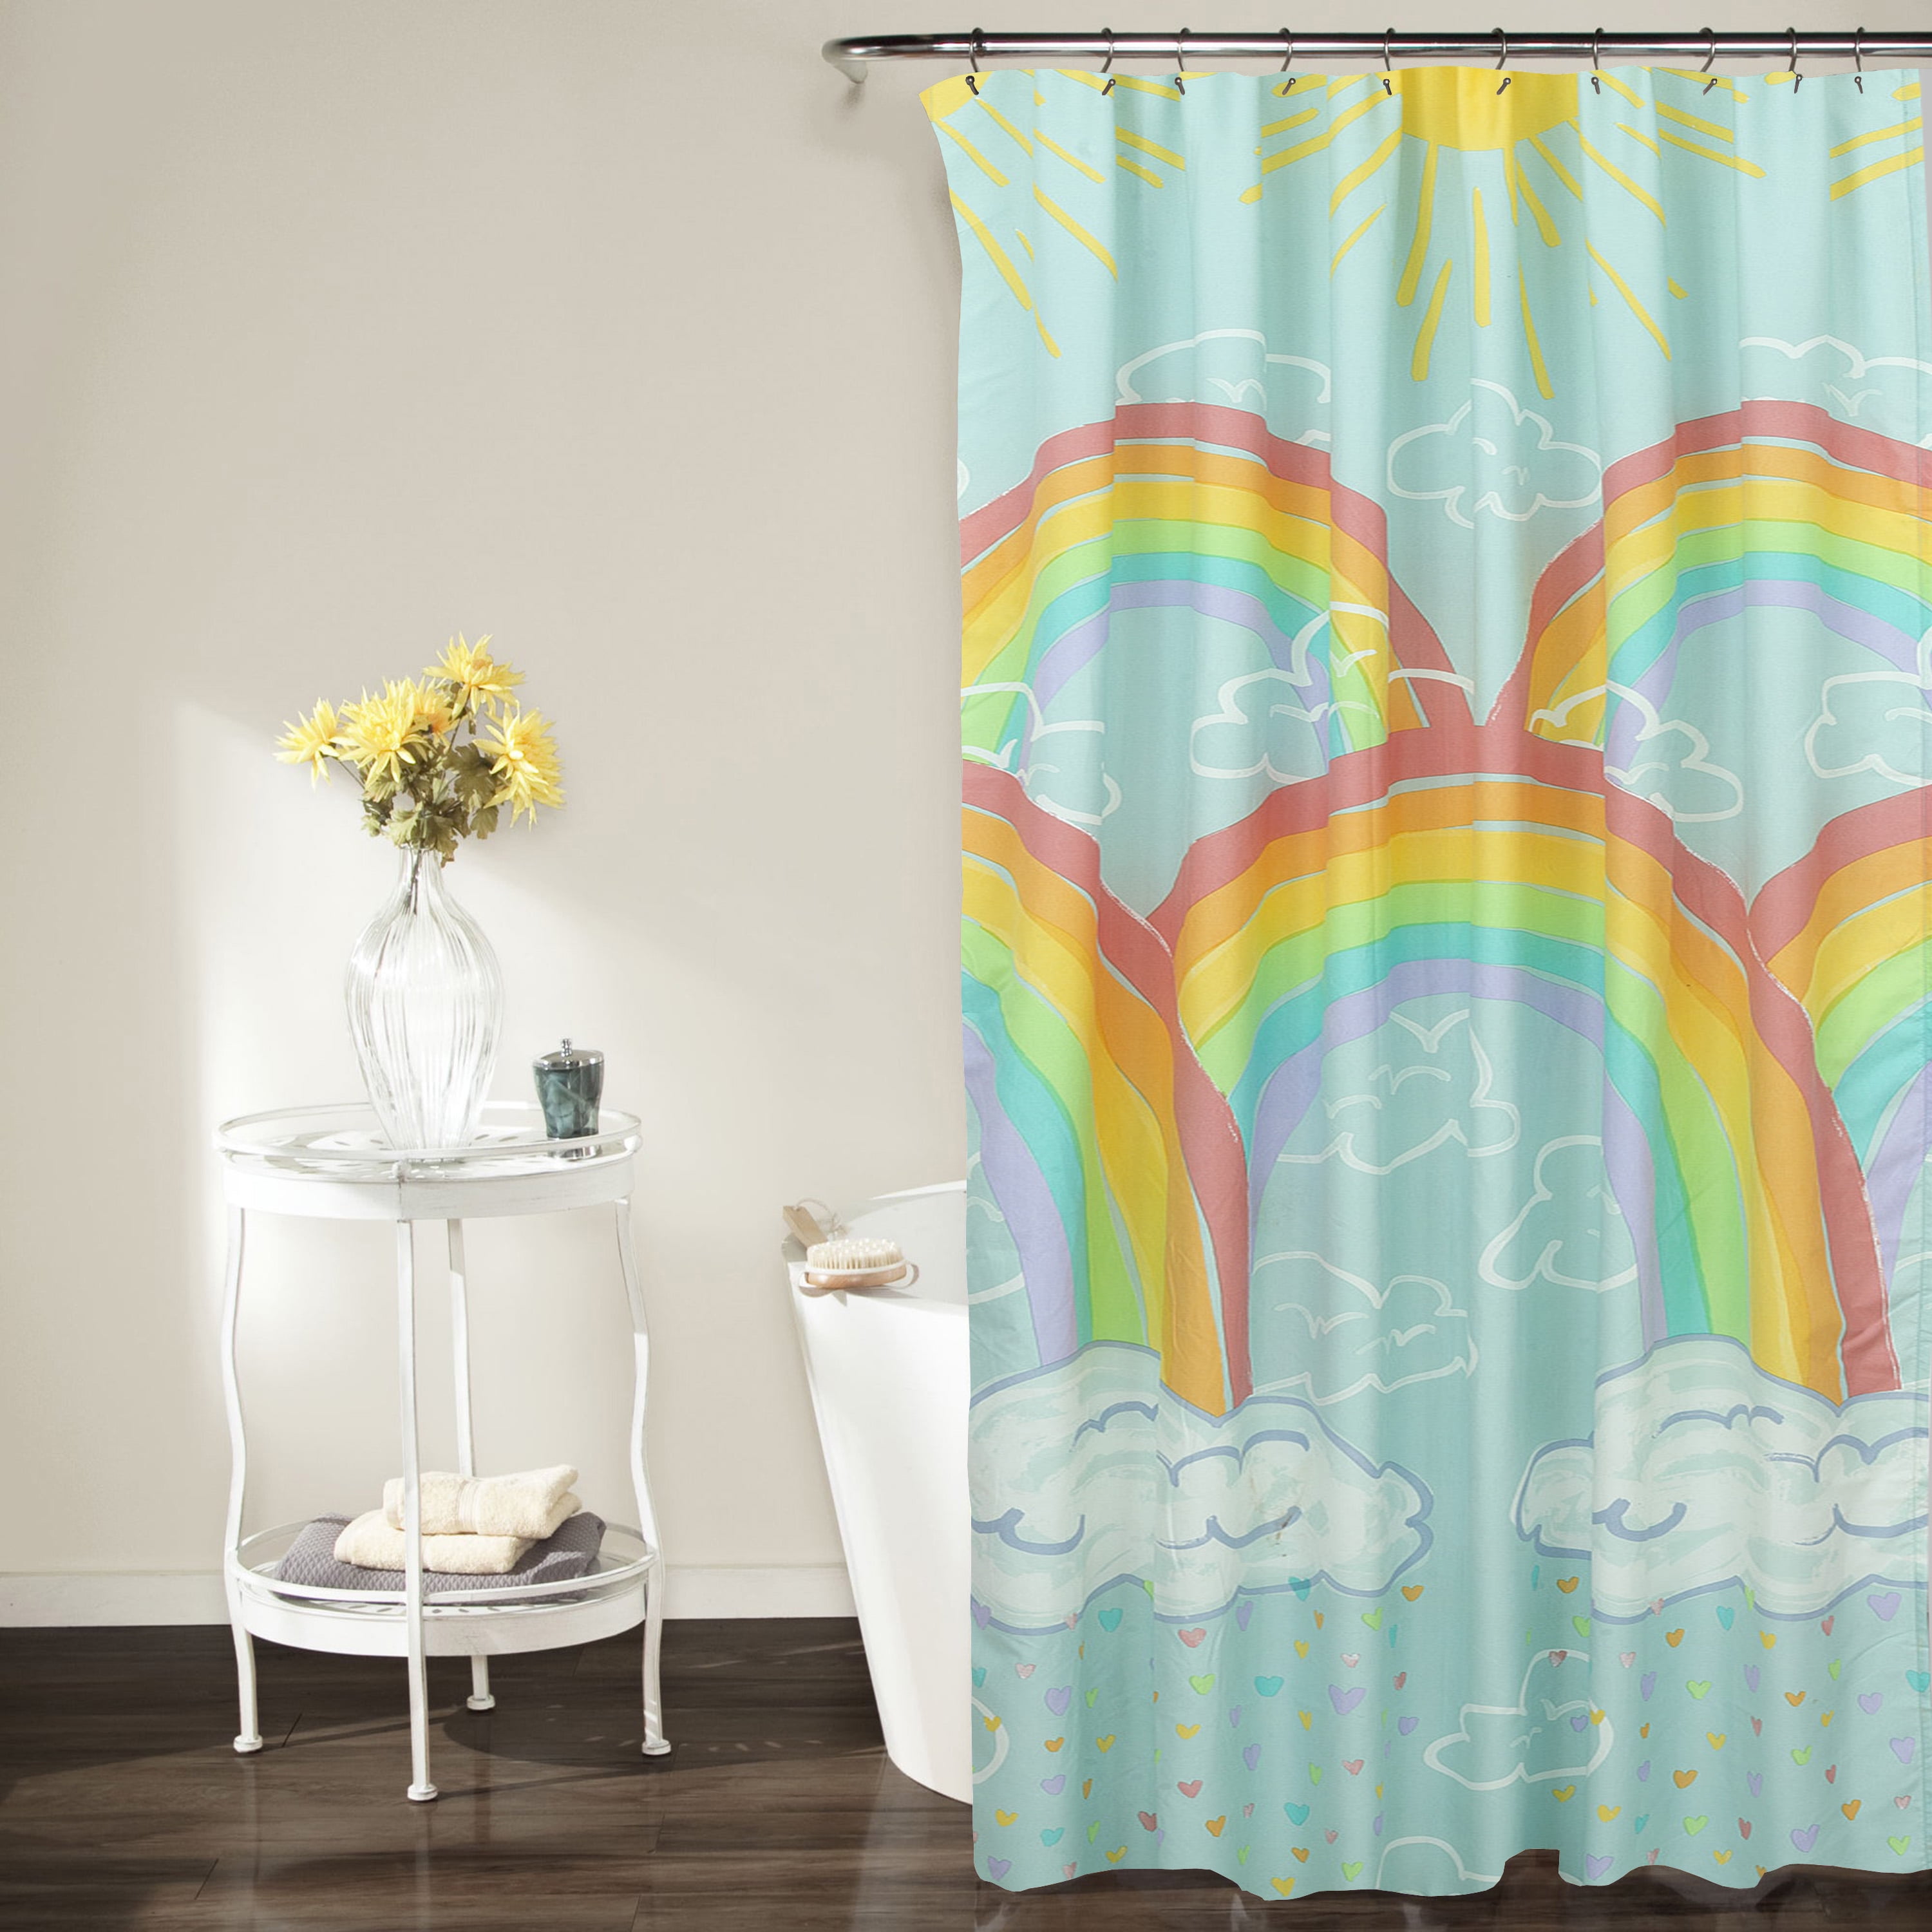 72" x 72" Creative VIlla Shower Curtain with rings 